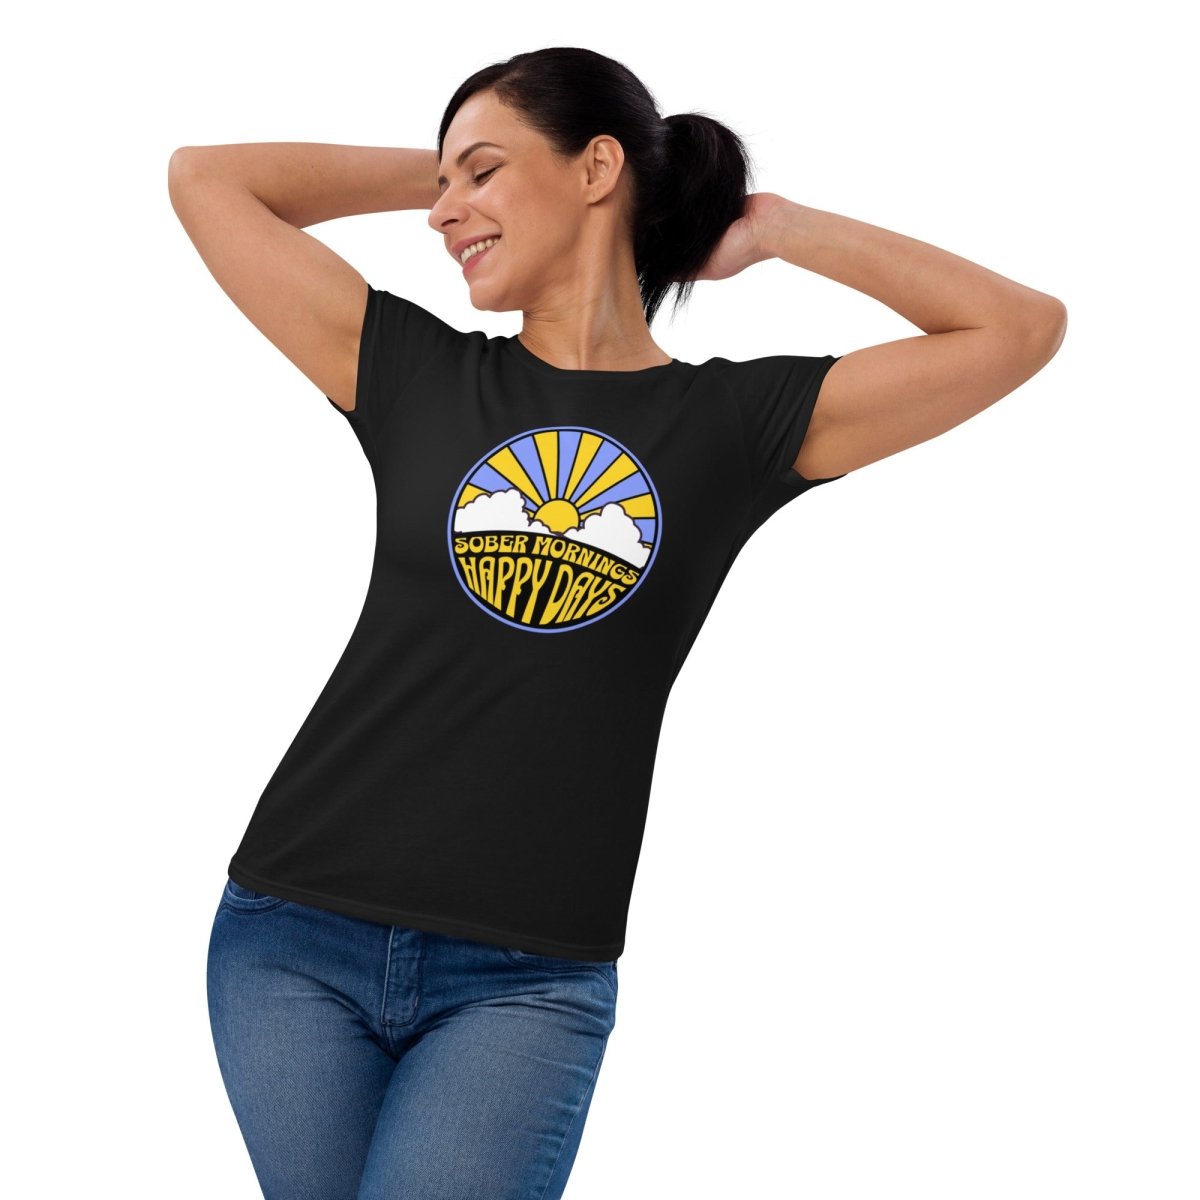 Sober Mornings Happy Days Fashion Fit Tee - Sobervation